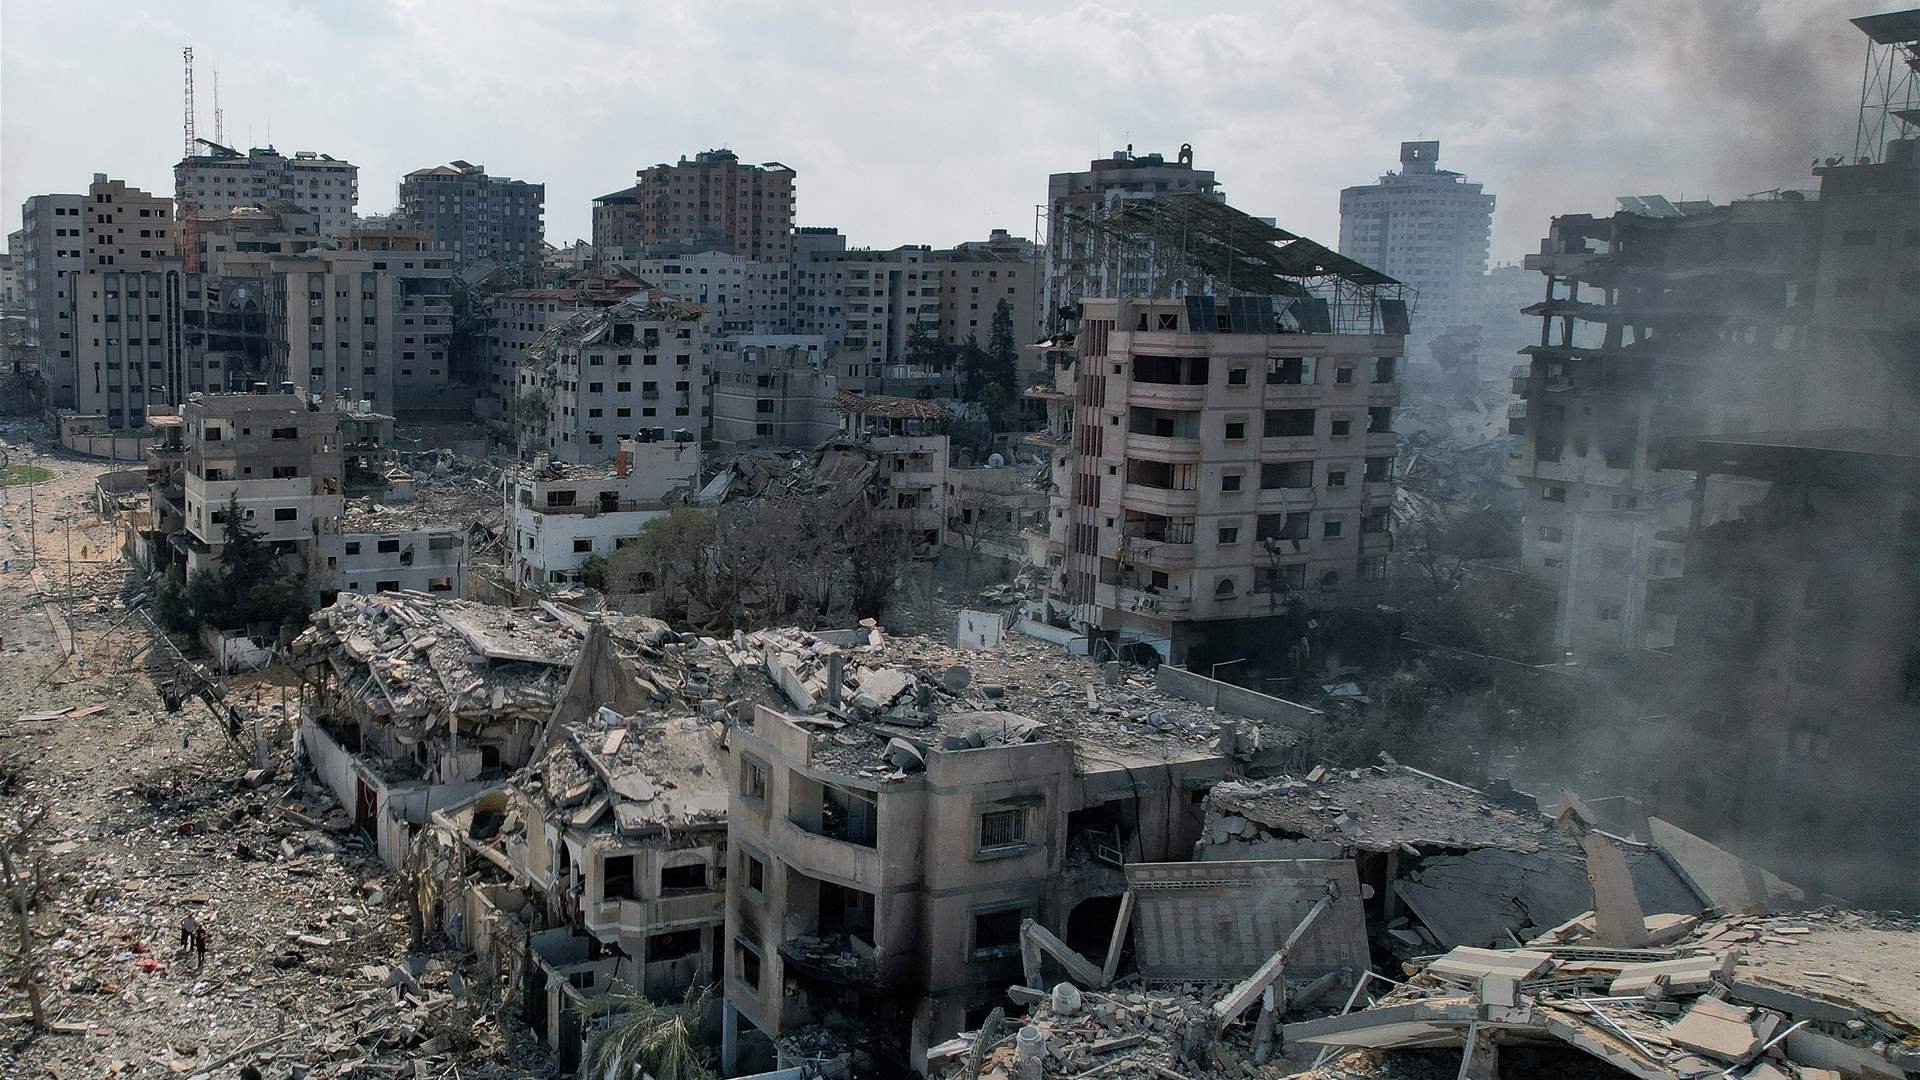 UN agency officials call for ceasefire in Gaza